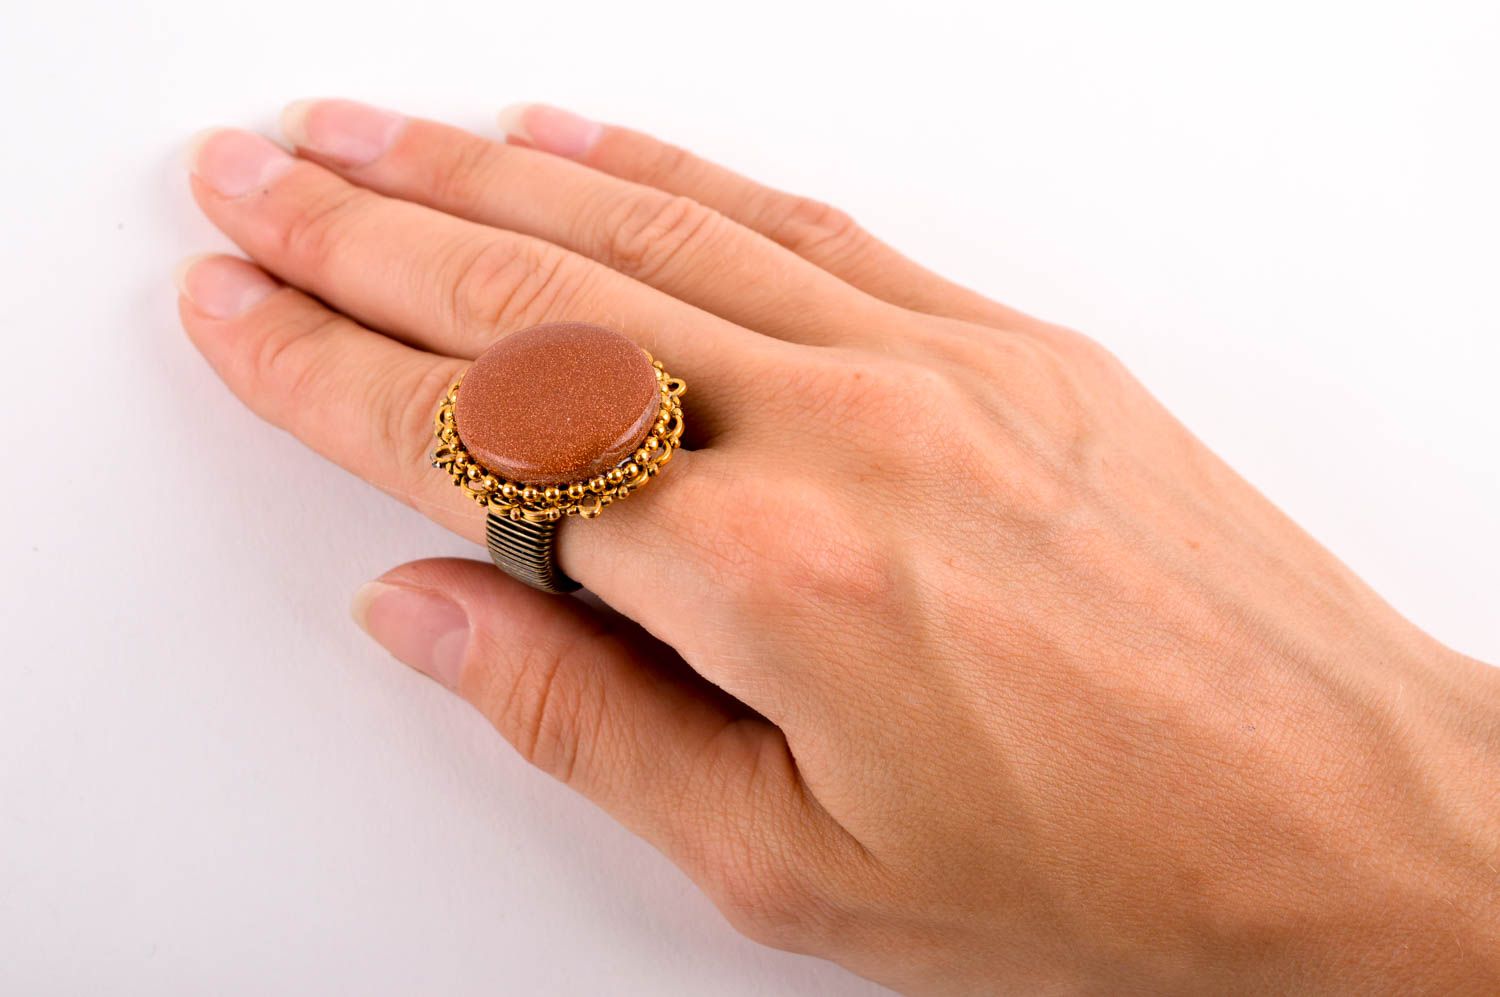 Handmade ring designer ring with stone unusual accessory for women gift ideas photo 4